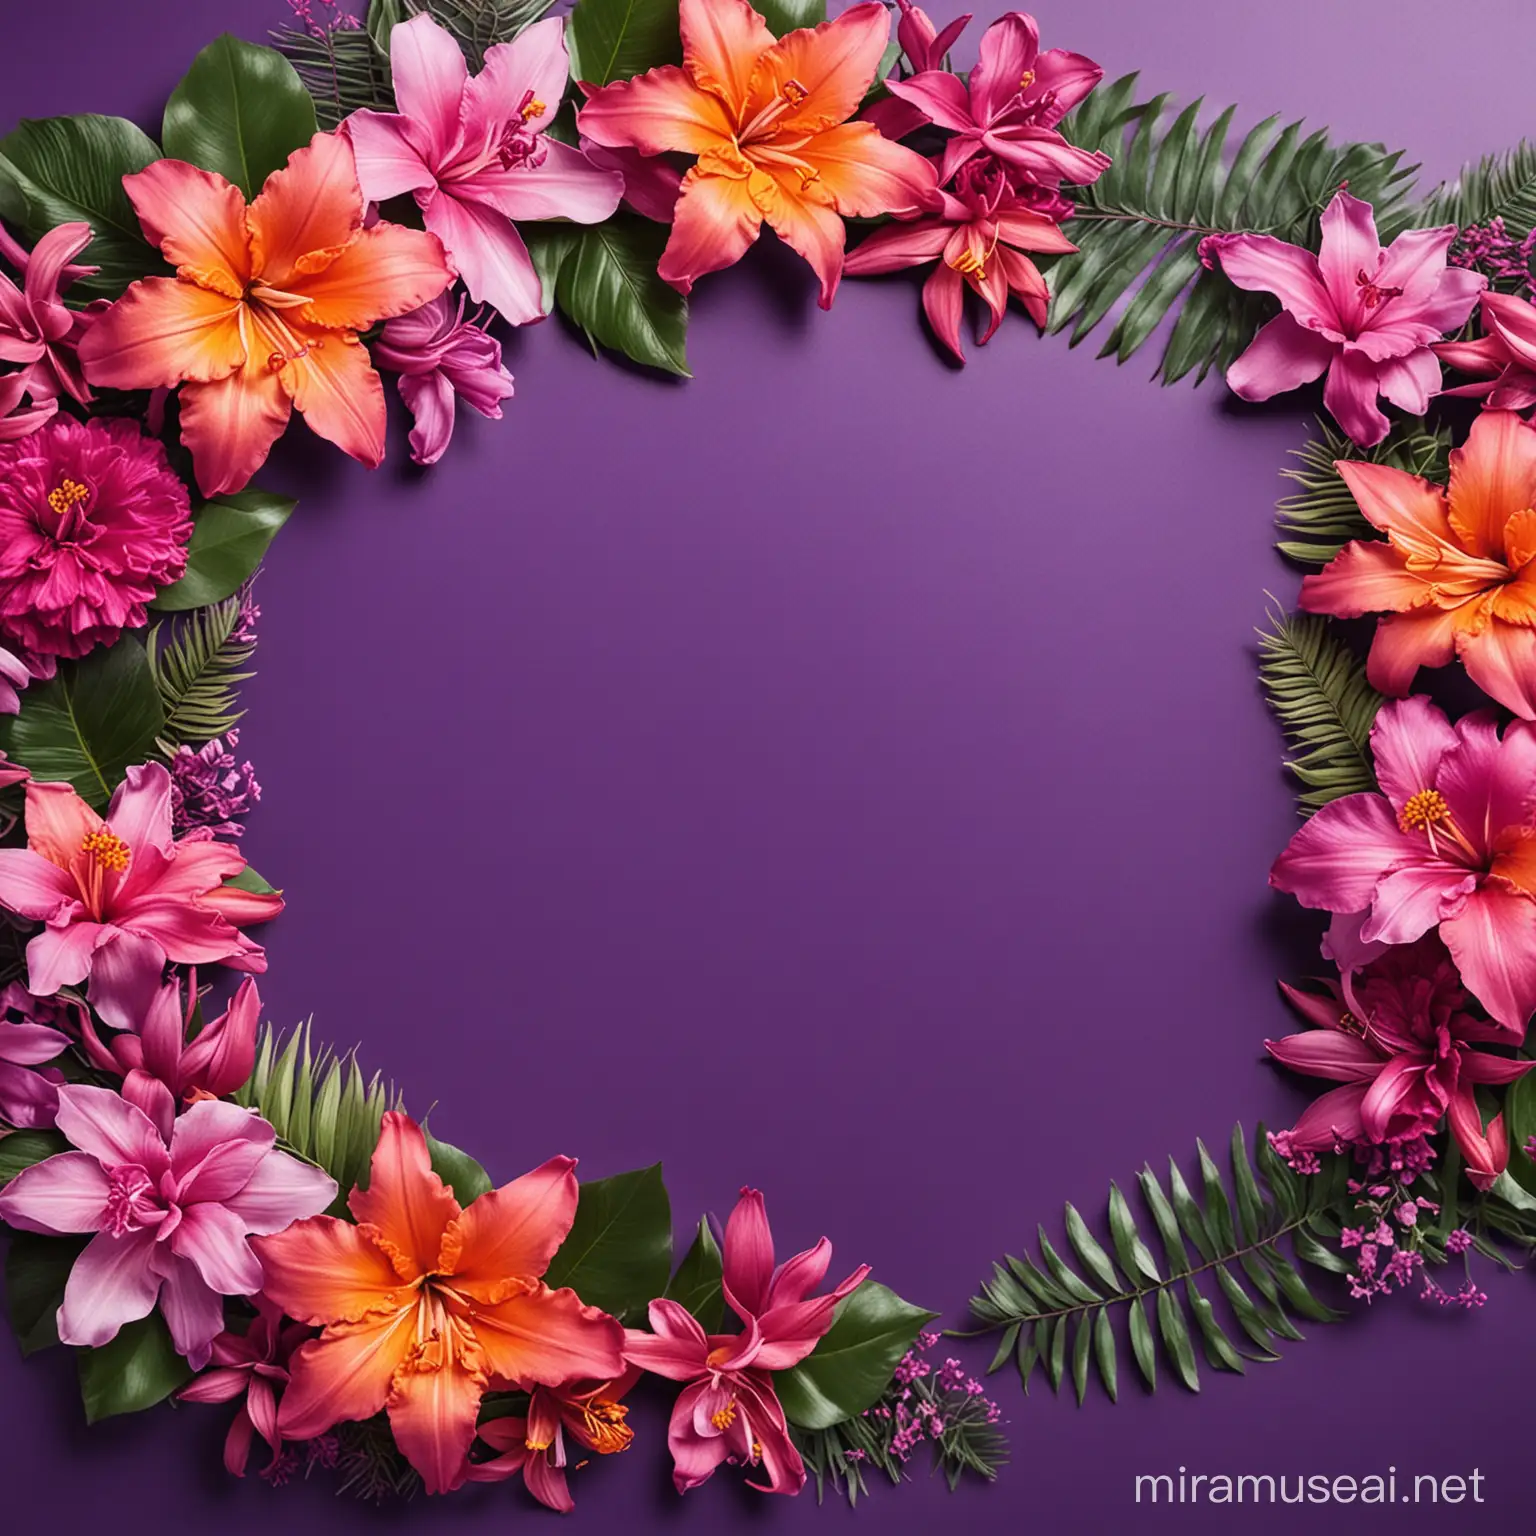 Vibrant Tropical Spring Flowers Border on Purple Background